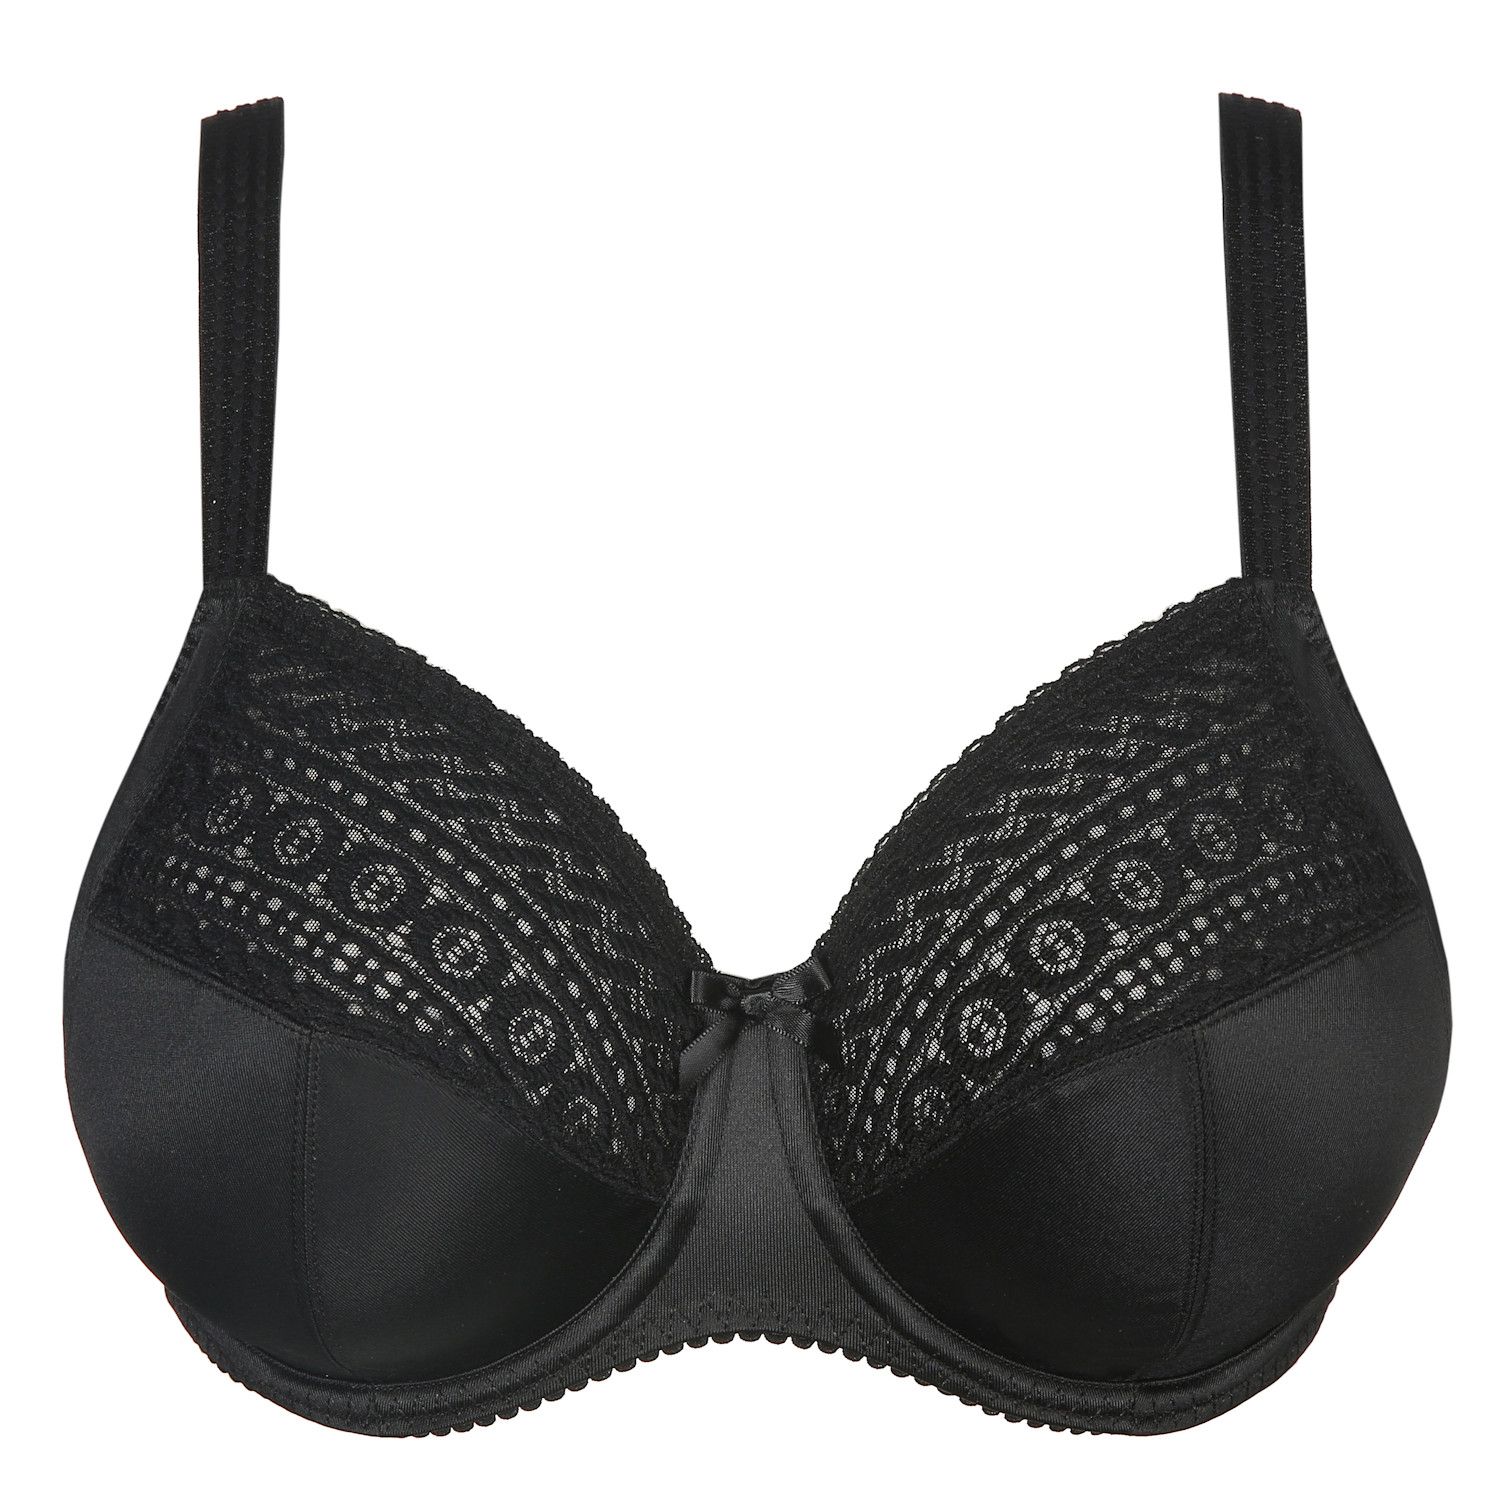 Find the Best HH-Cup Bras